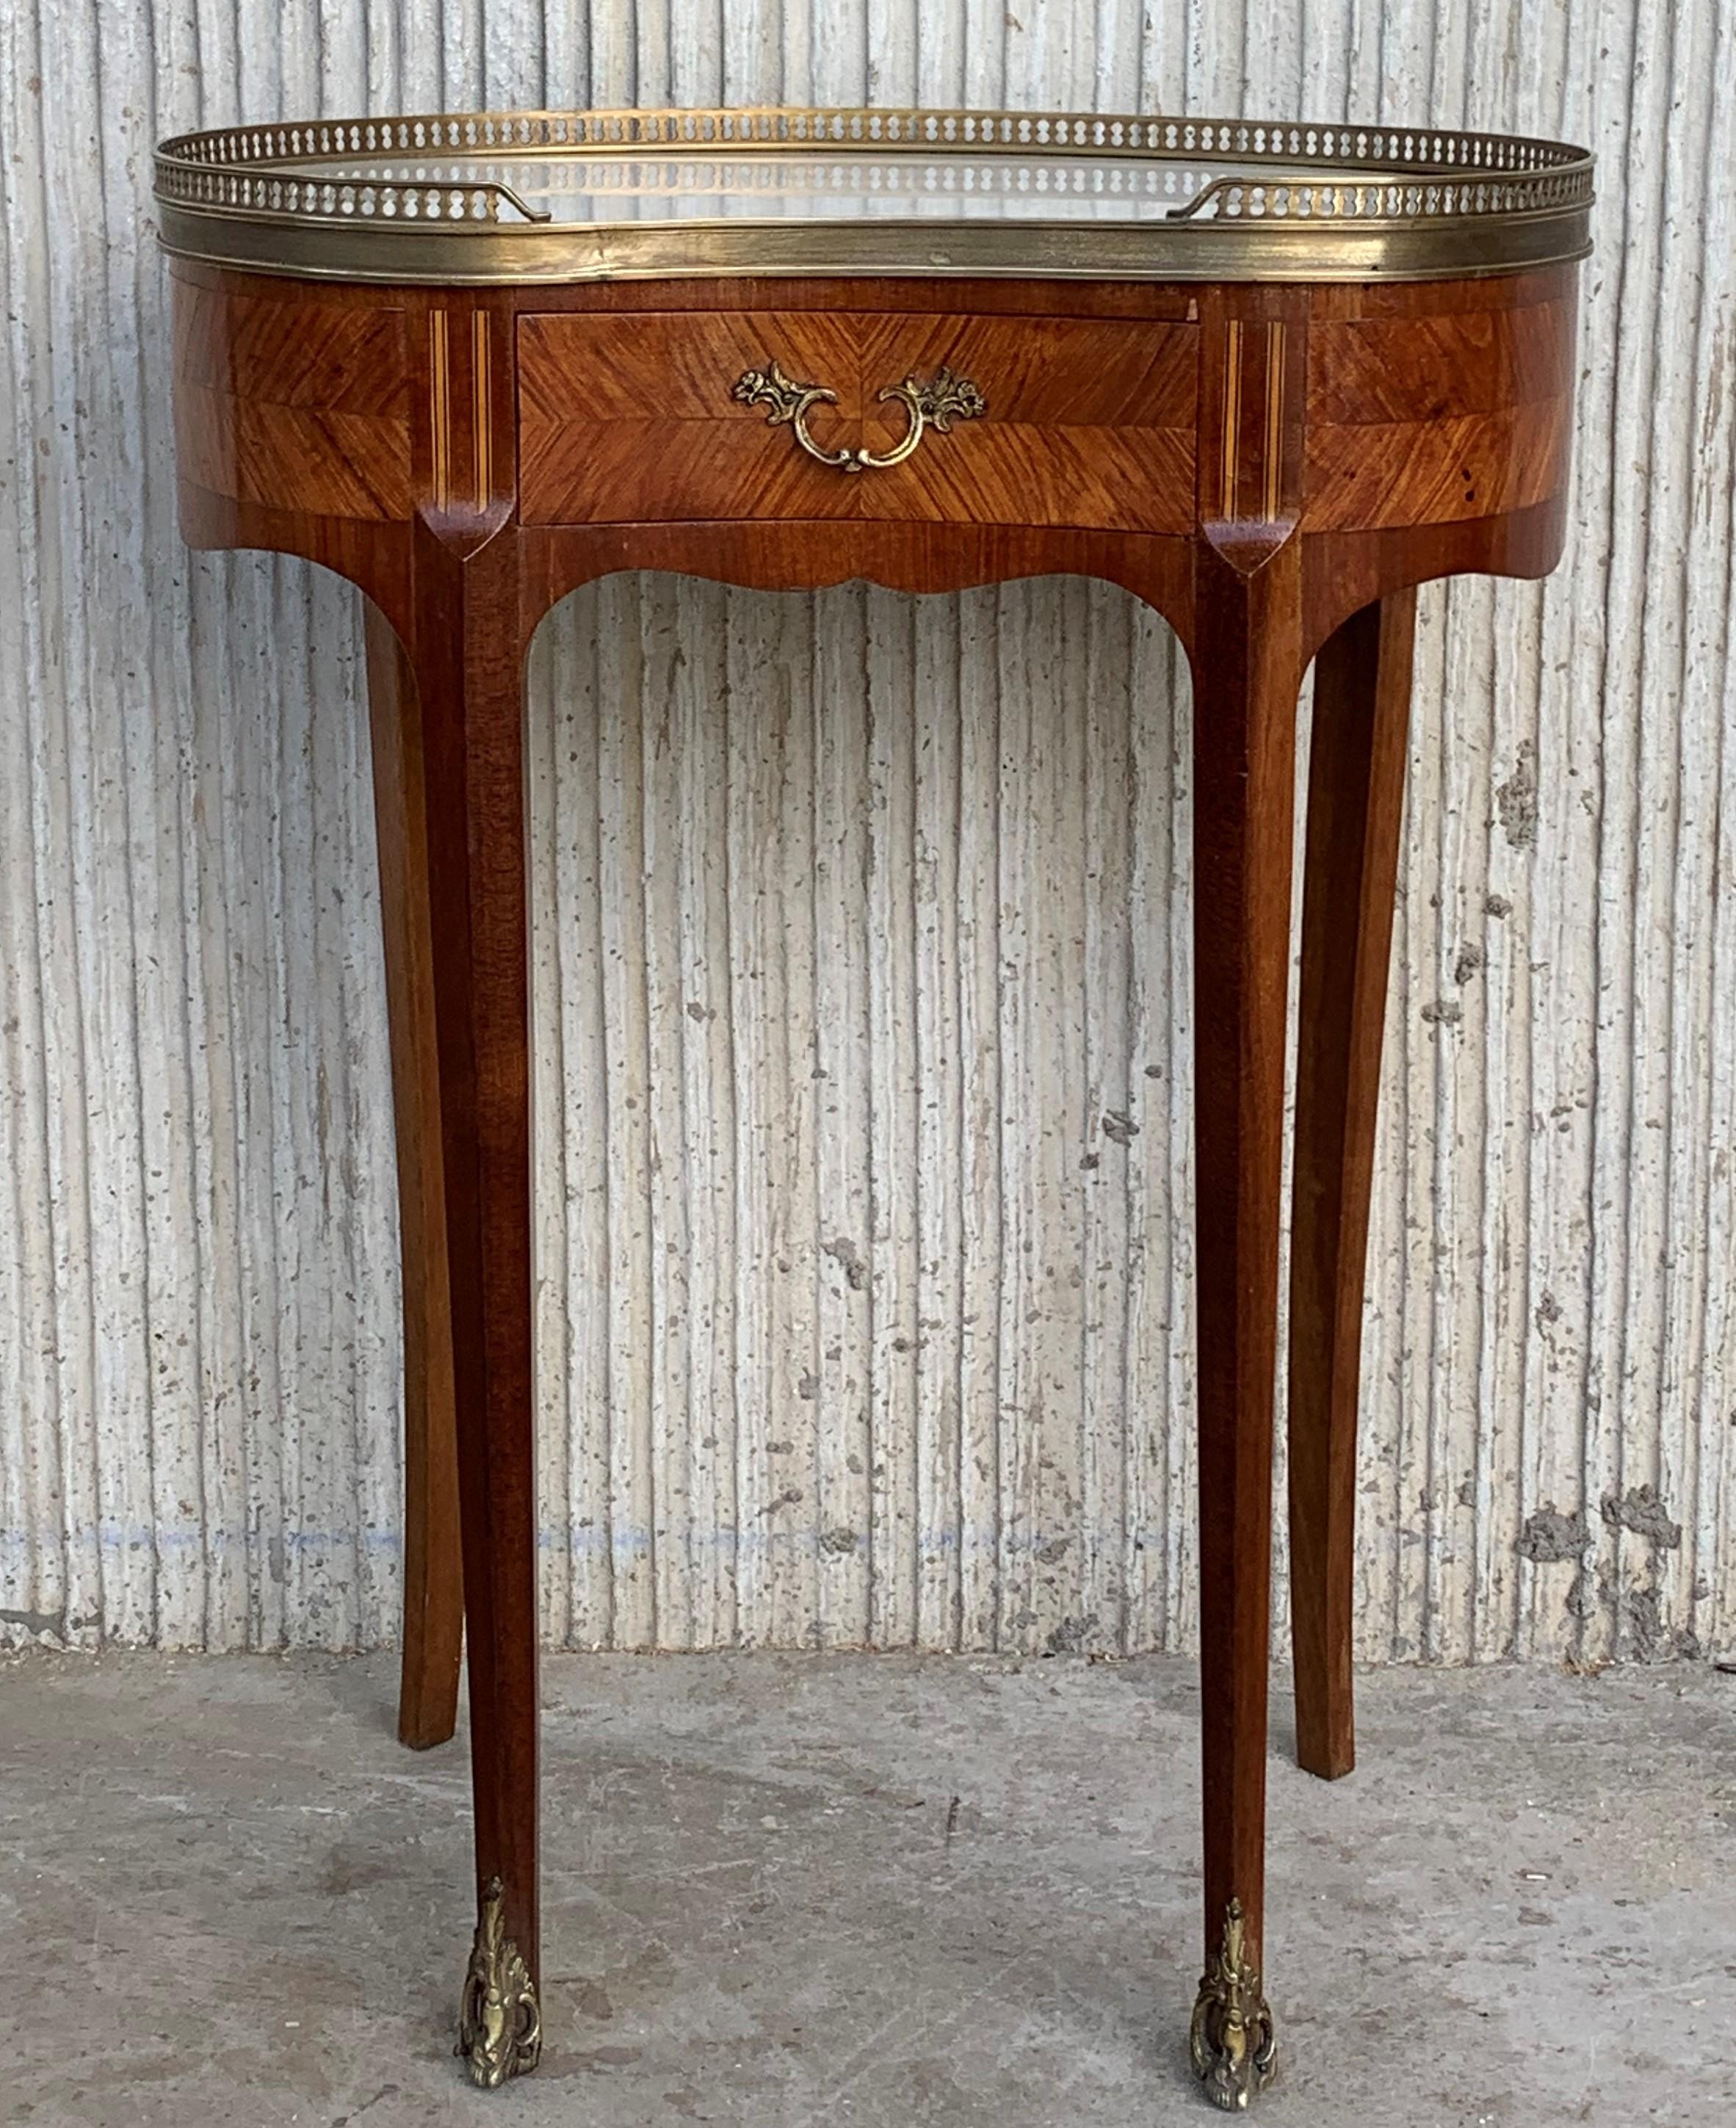 Pair of French nightstands bedside tables Louis revival, circa 1910
Side cabinets
Unusual kidney shape tops with beautiful and shiny white marble
Pierced brass gallery Bouillotte
Each with a small drawer.